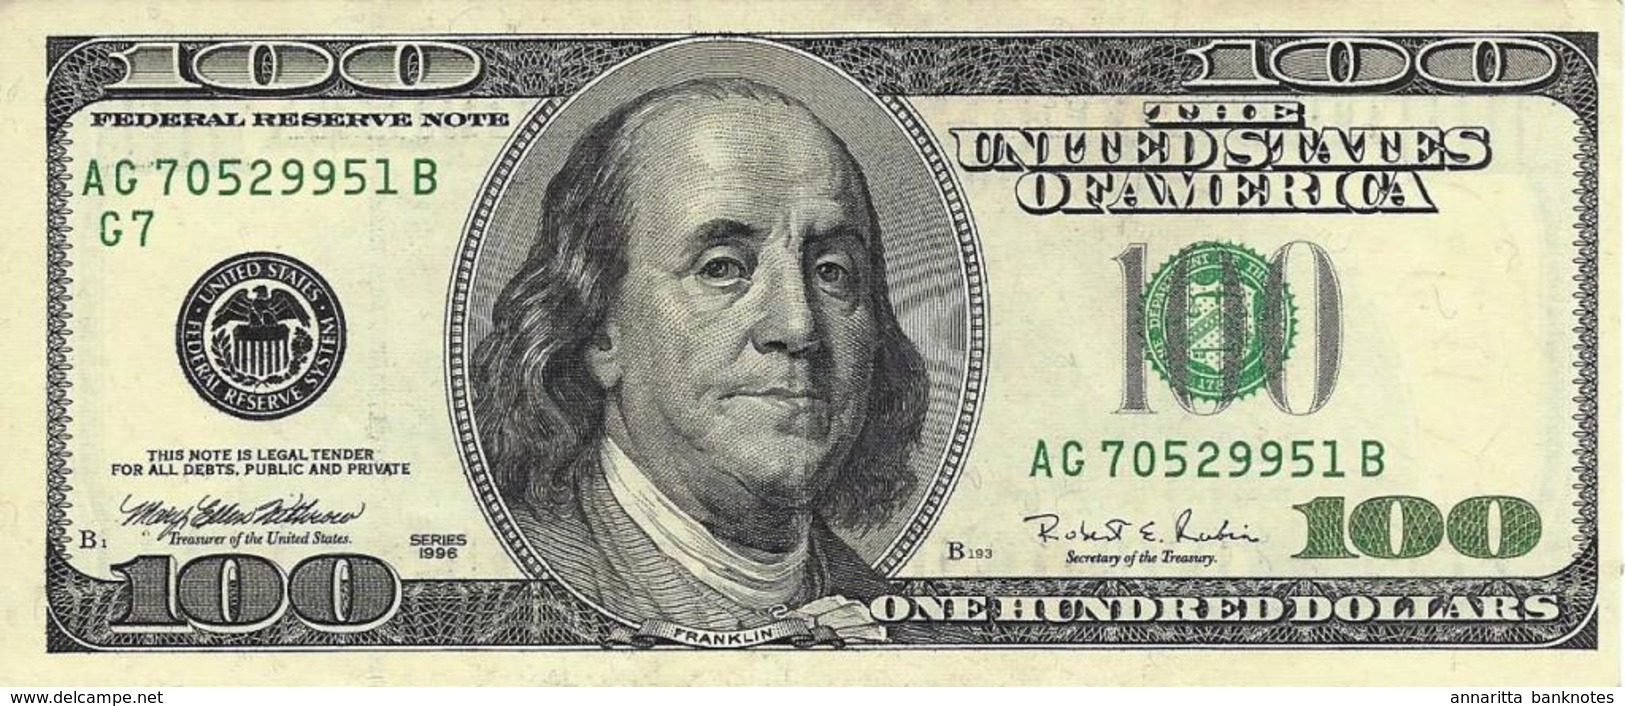 UNITED STATES 100 DOLLARS 1996 P-503G AU/UNC G7 - CHICAGO IL [US503G] - Federal Reserve (1928-...)